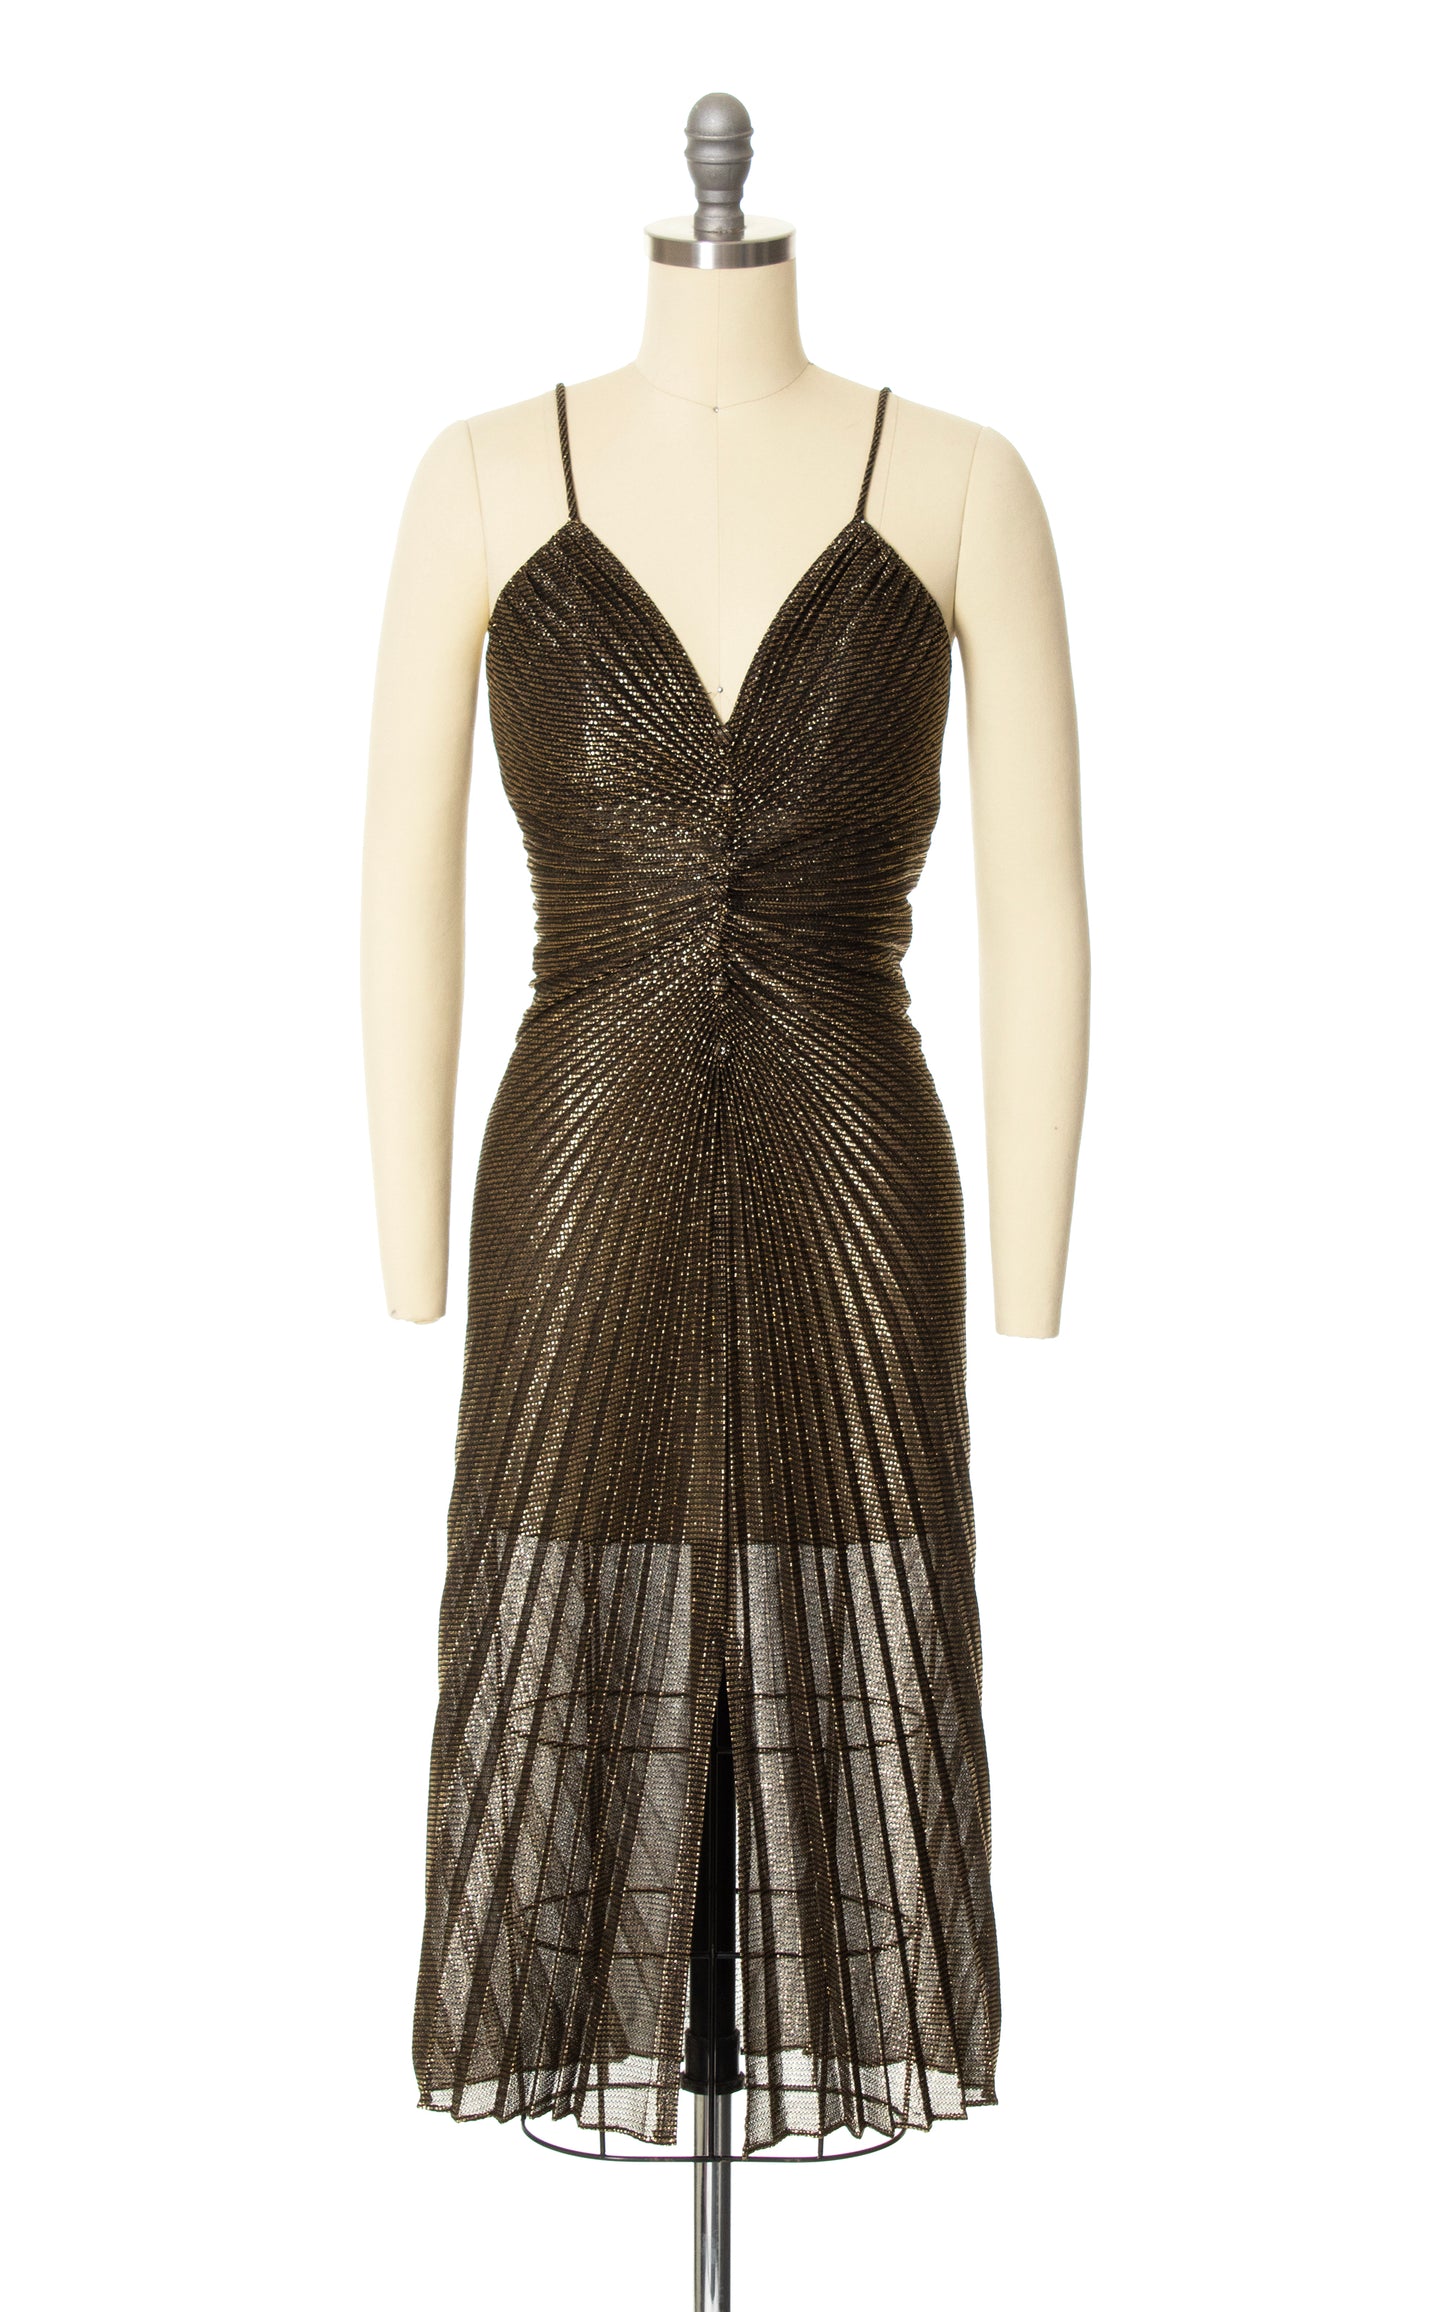 1980s Travilla for Marilyn Monroe Inspired Metallic Pleated Dress | x-small/small